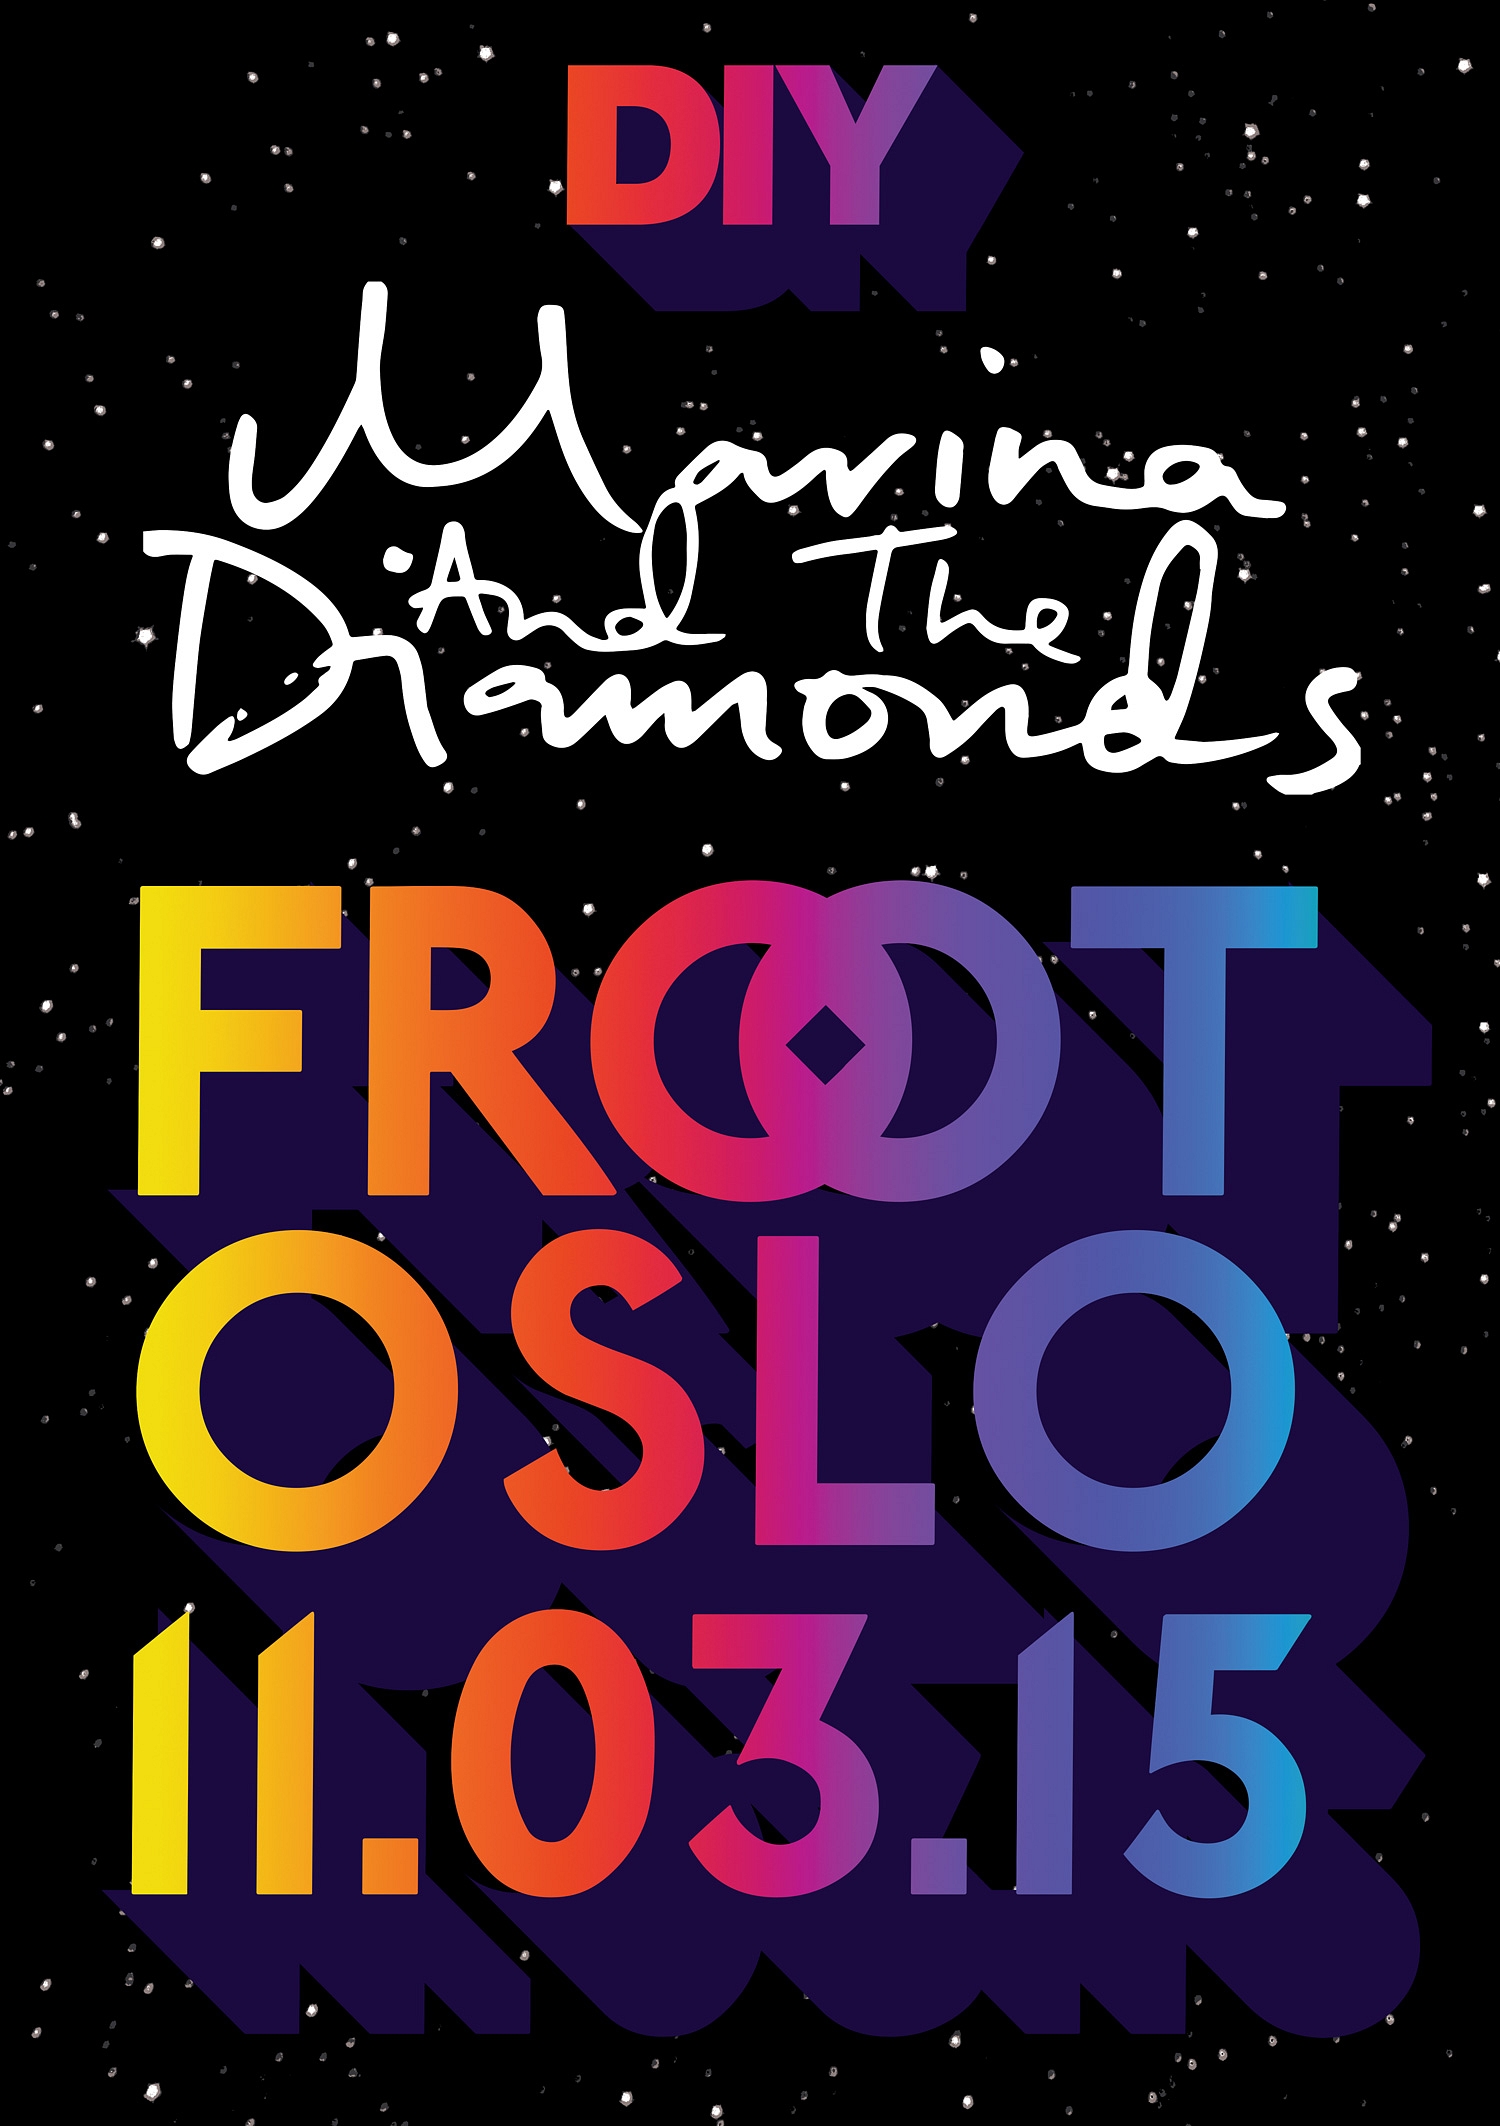 Marina and the Diamonds to play intimate DIY show - now sold out